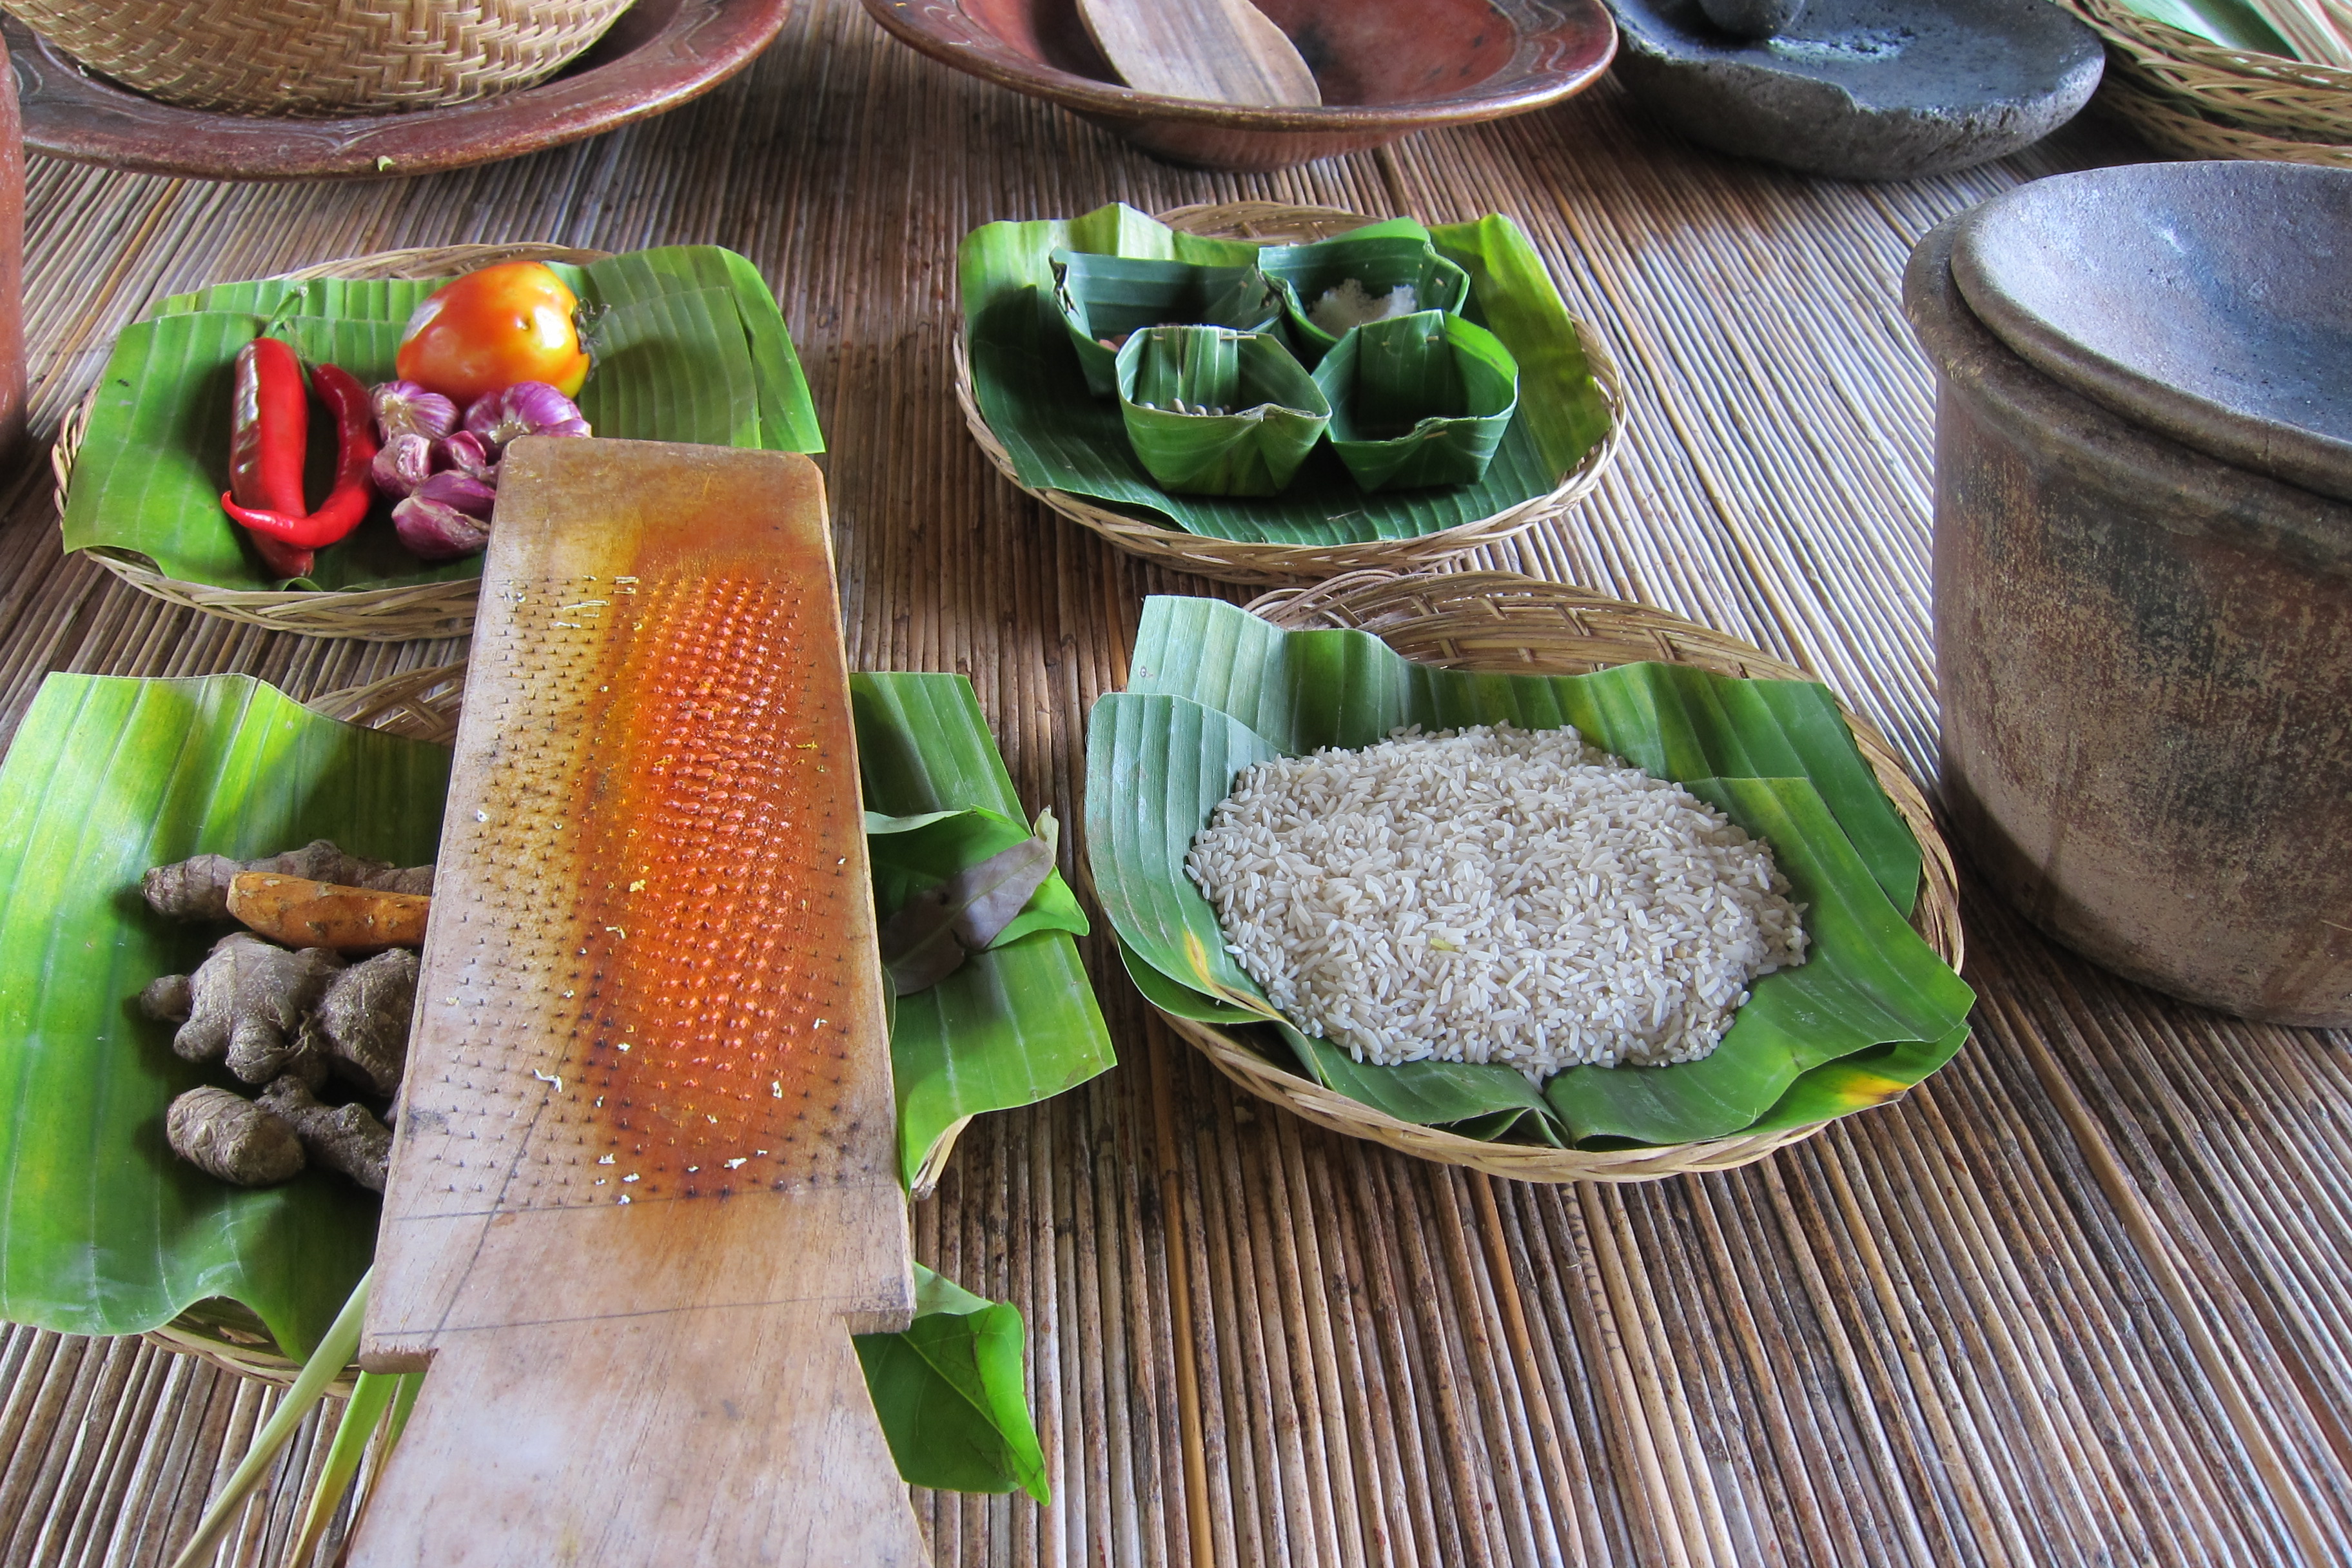 Ubud Cooking Class The Best Way To Taste Bali Culture